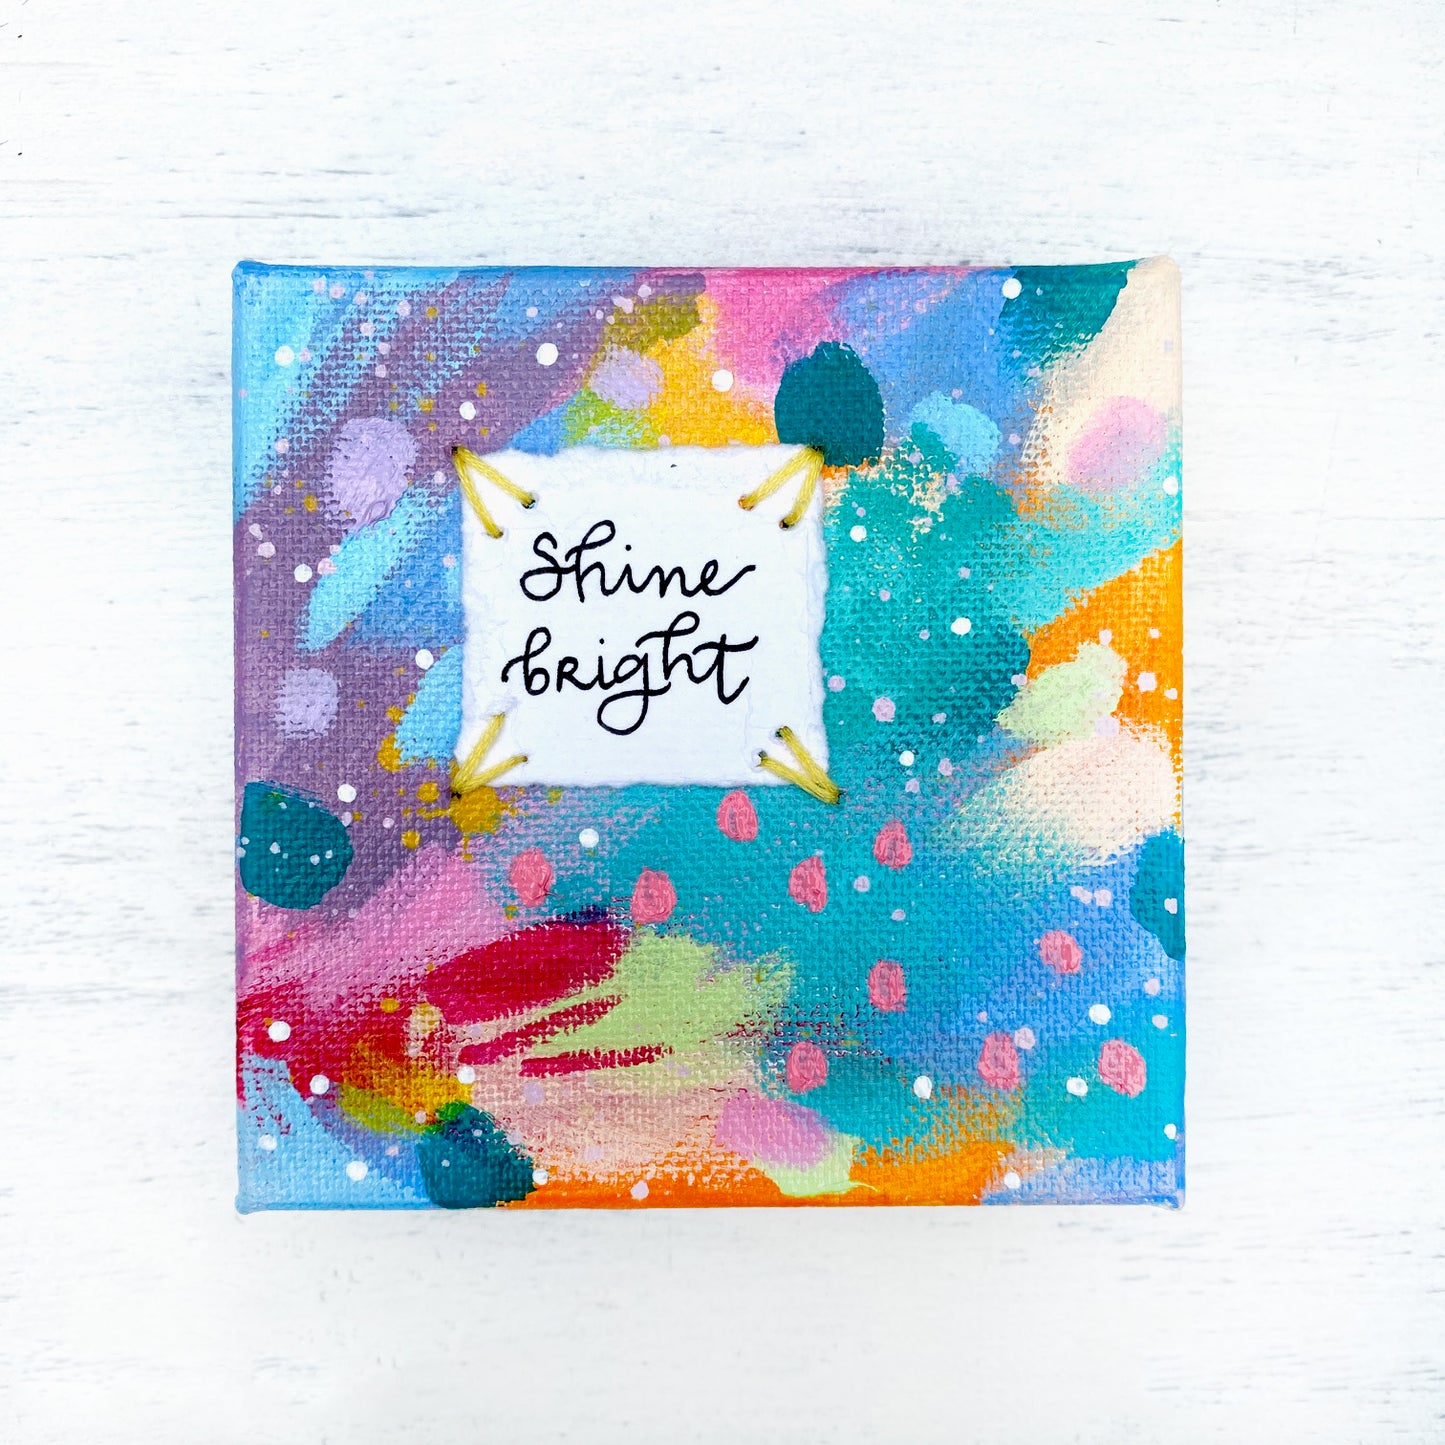 Shine Bright 4x4 inch original abstract canvas with embroidery thread accents - Bethany Joy Art